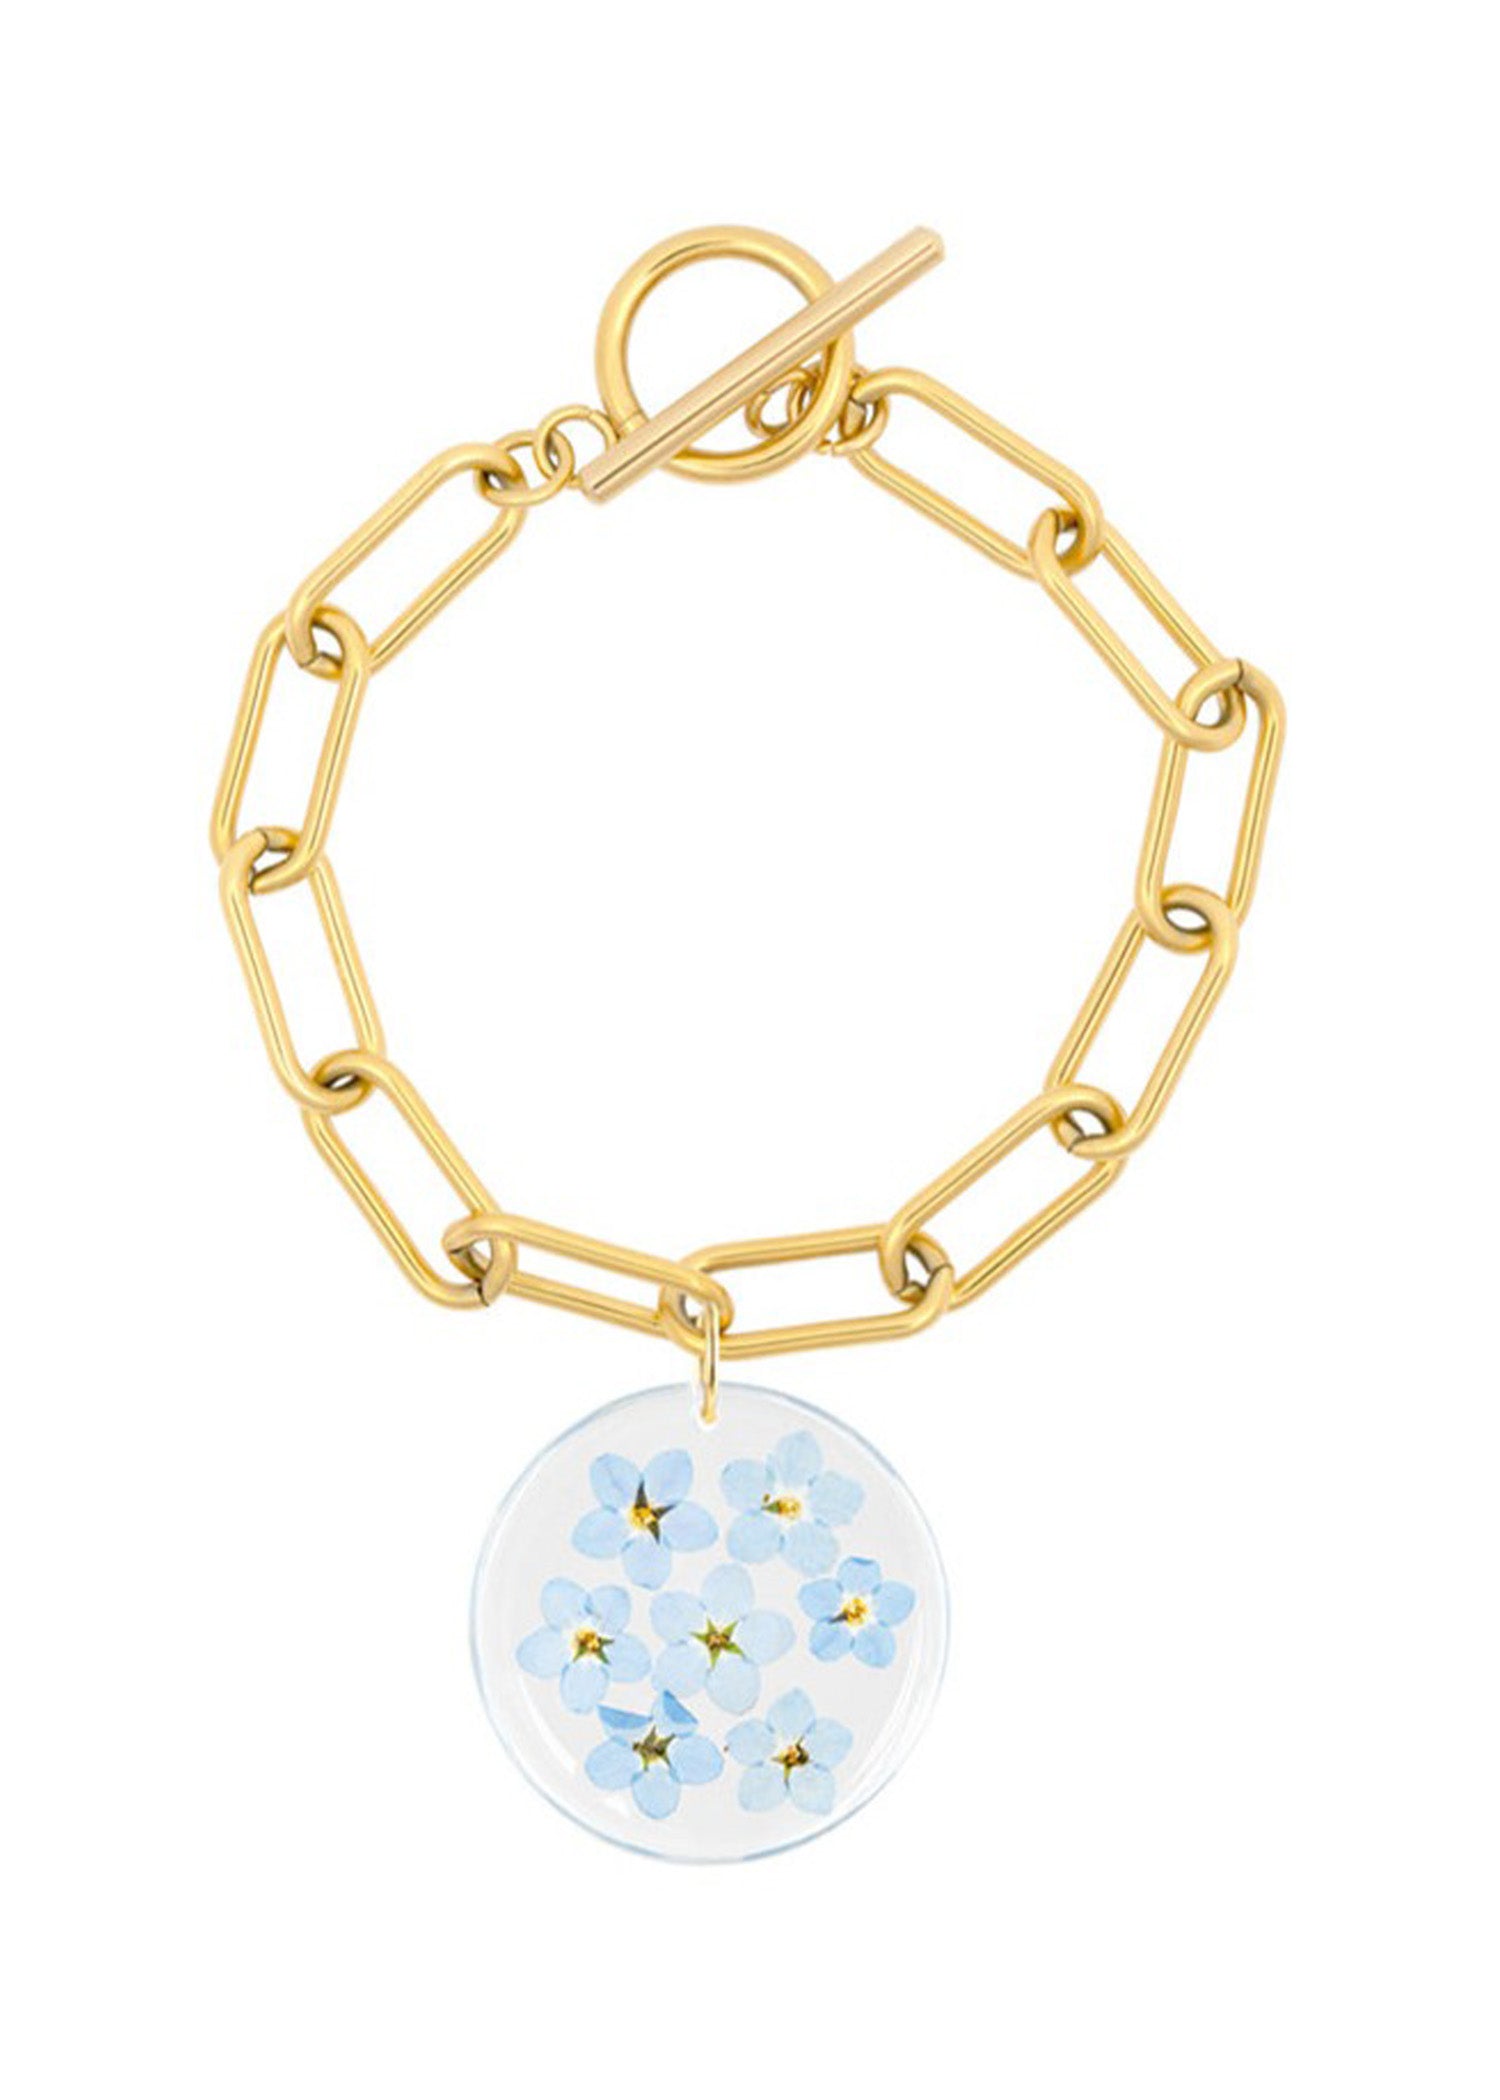 Real forget-me-not flowers suspended from a gold Albert chain with a toggle clasp